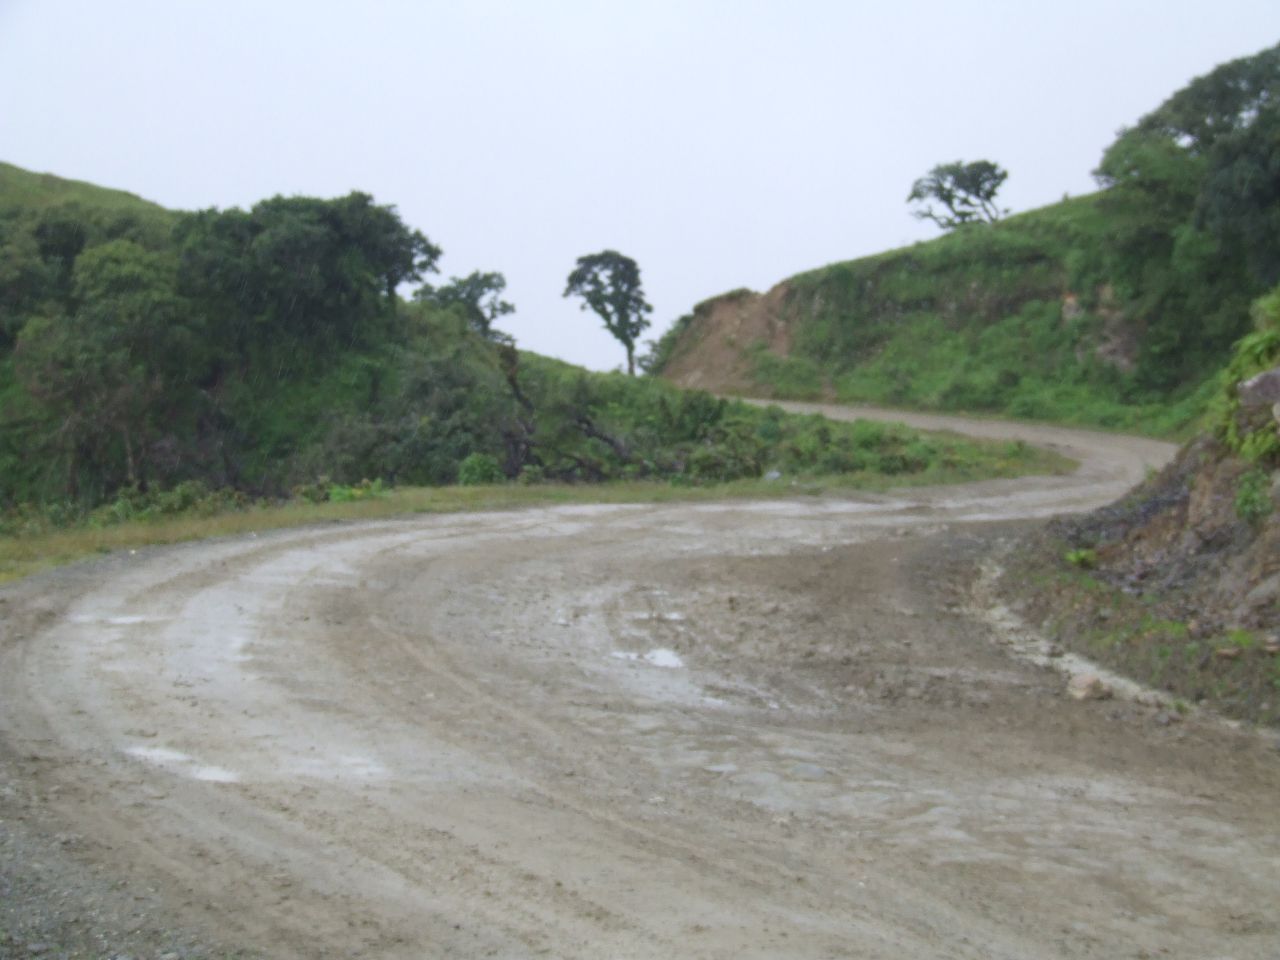 a view of a dirt road leading uphill